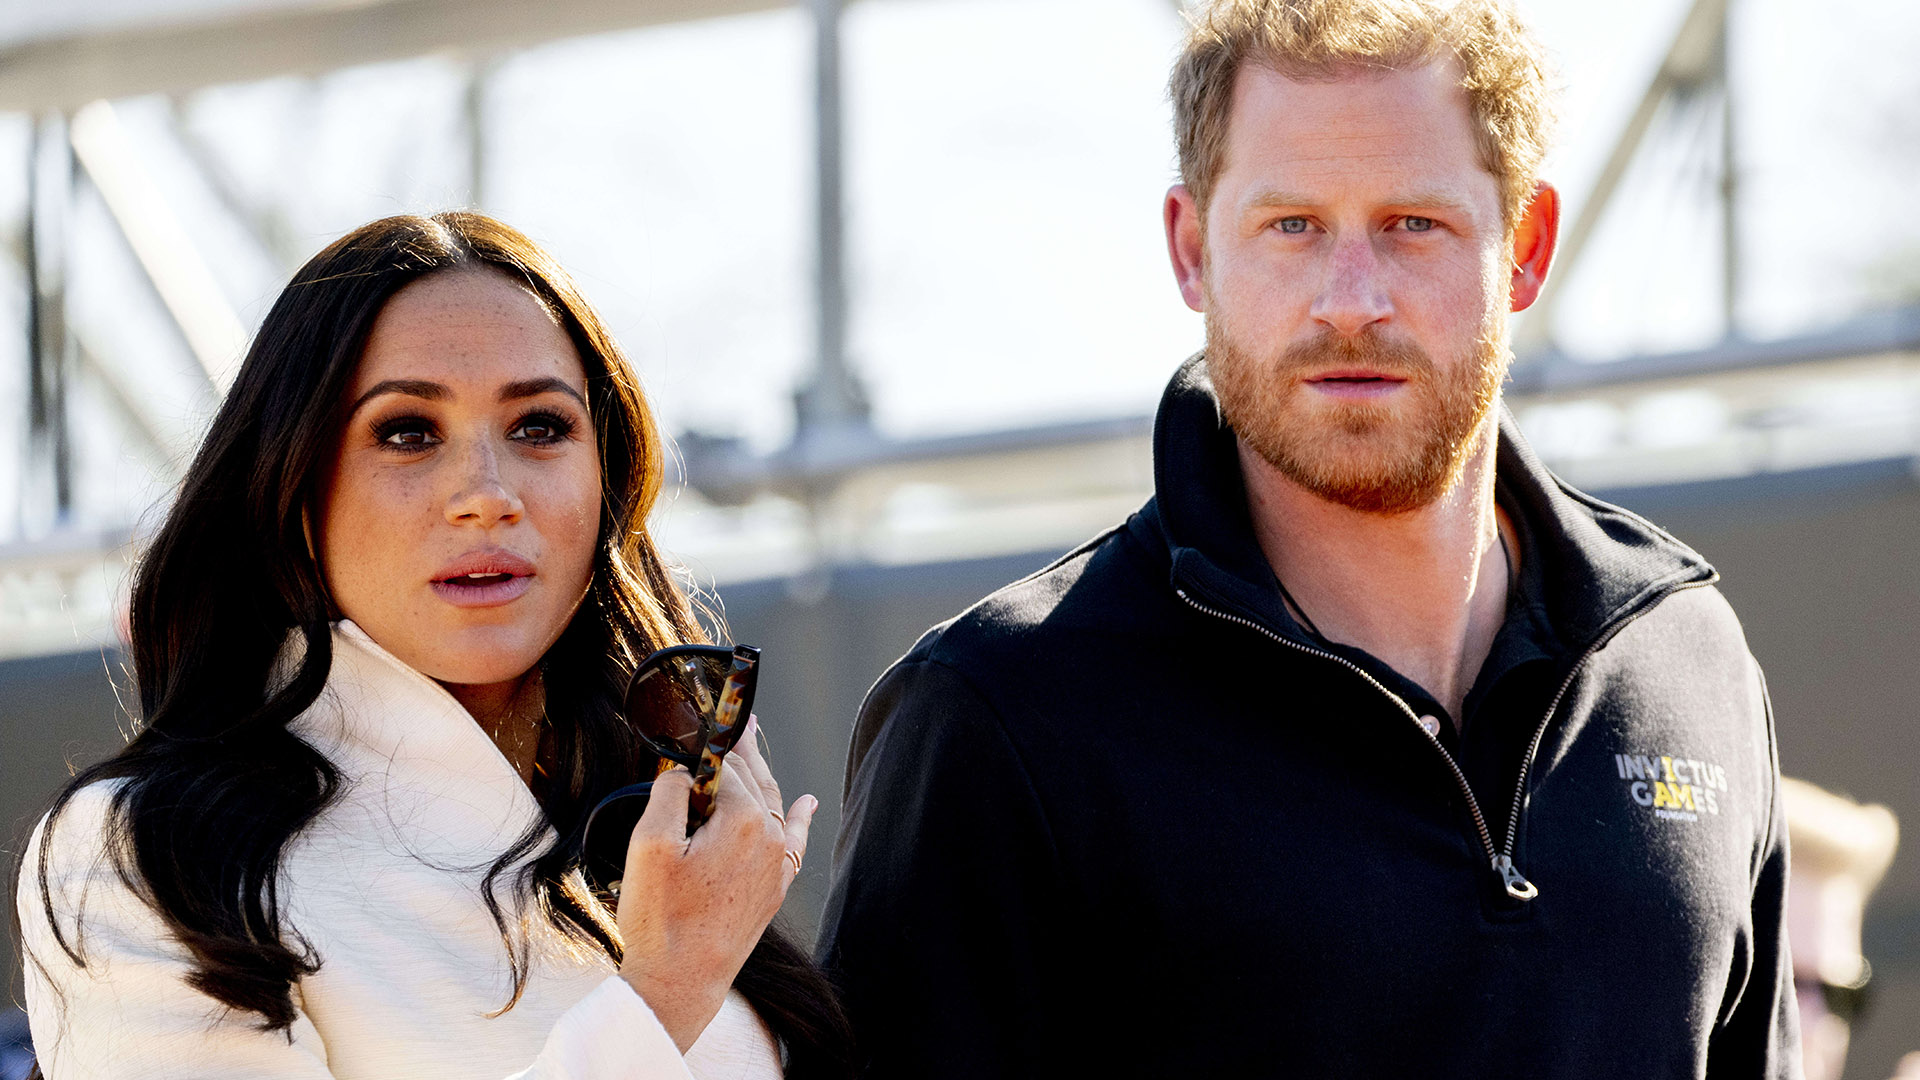 Meghan Markle's Coronation Snub: Will It Further Damage Her Image?